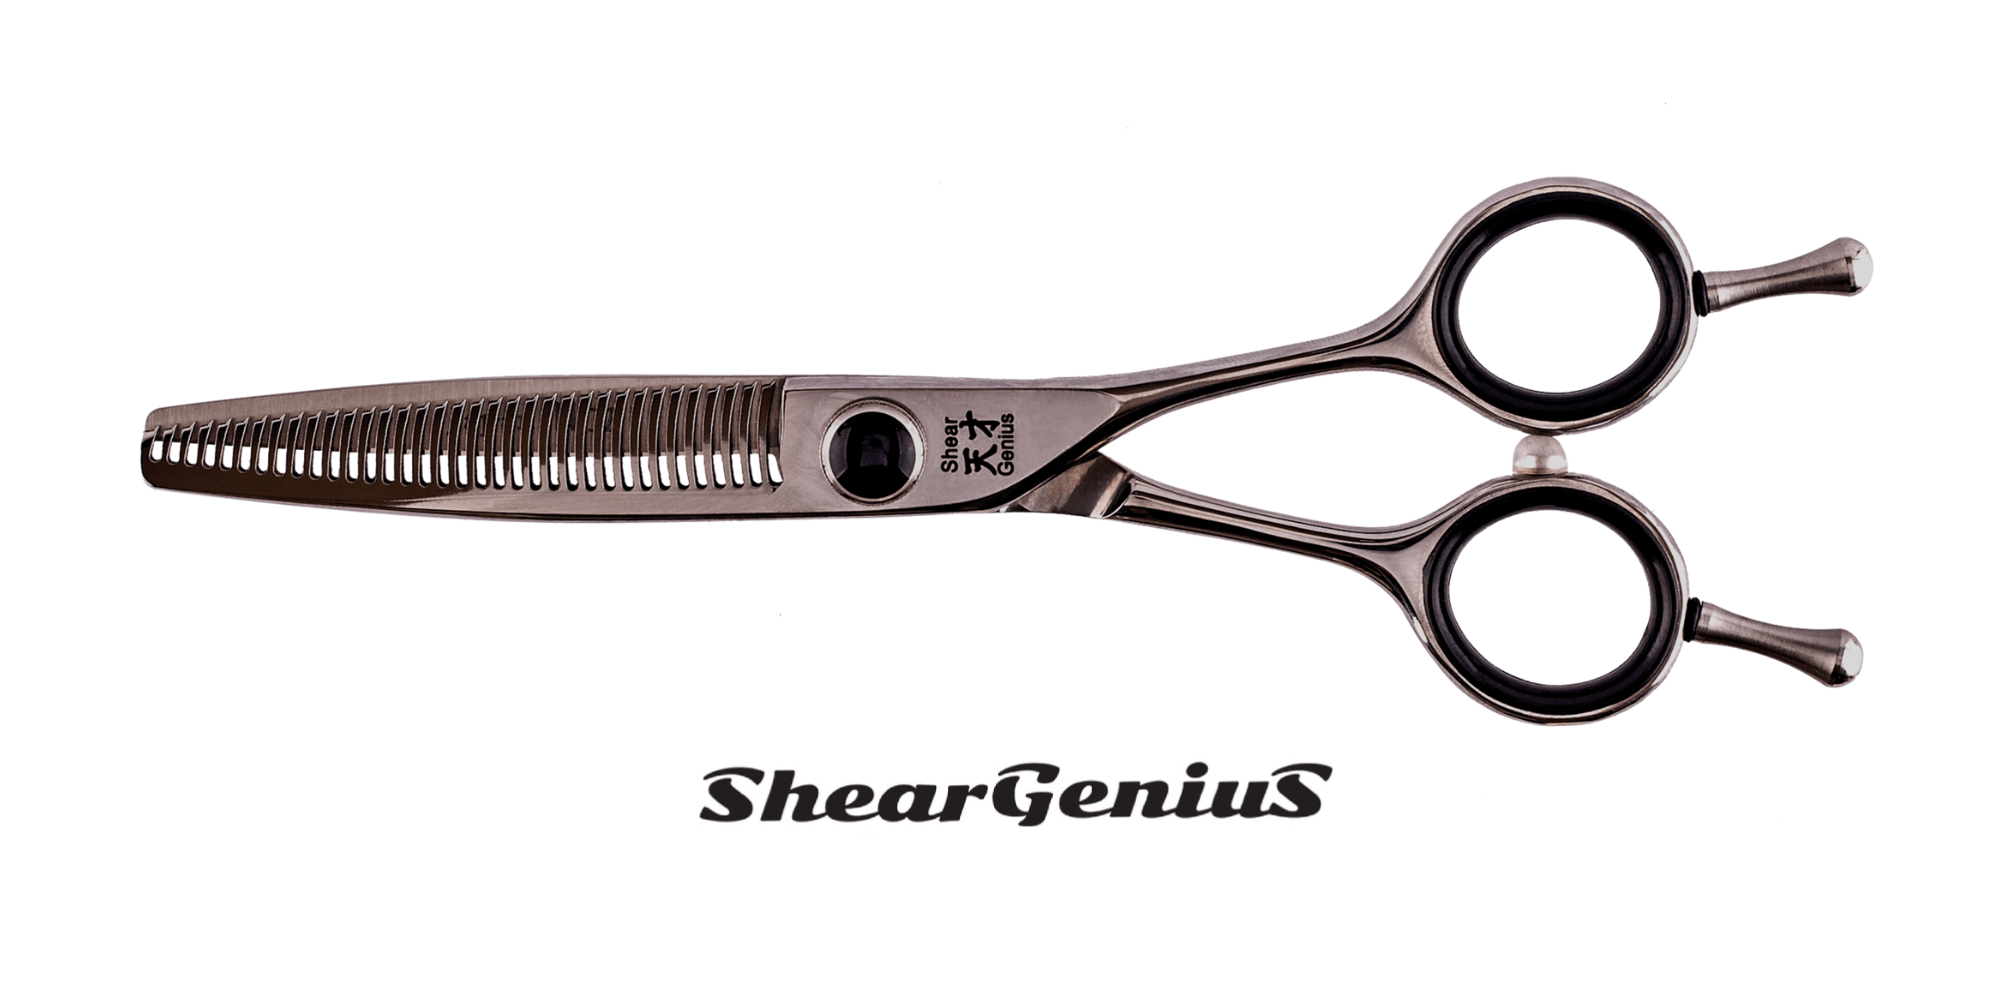 The 35 unique Vampire radial teeth allows slide texturizing removing weight and softly blending layers leaving no lines or grabbing, a symmetrical handle with 2 fing{{ product.title | escape }} - High-Quality Professional Hairdressing Scissors